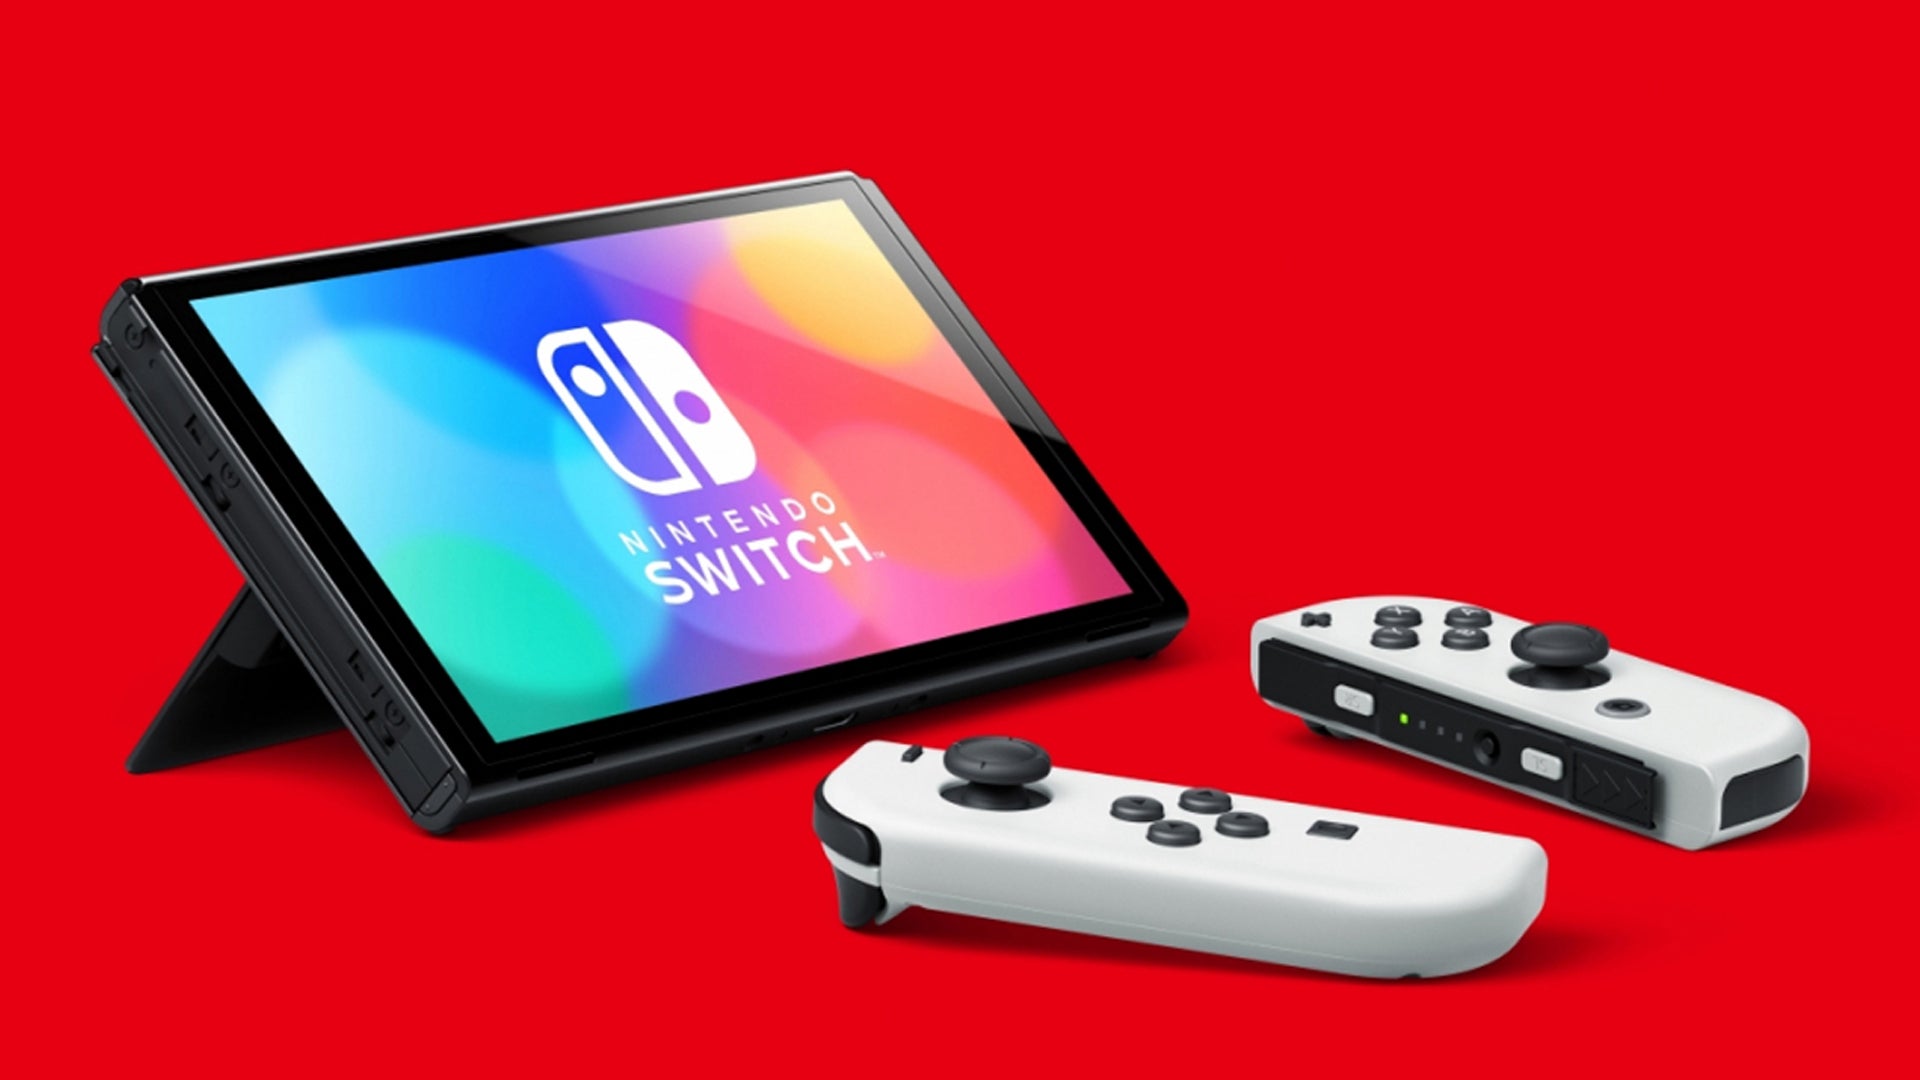 Image for Nintendo has no plans for a Nintendo Switch price hike "at this point"